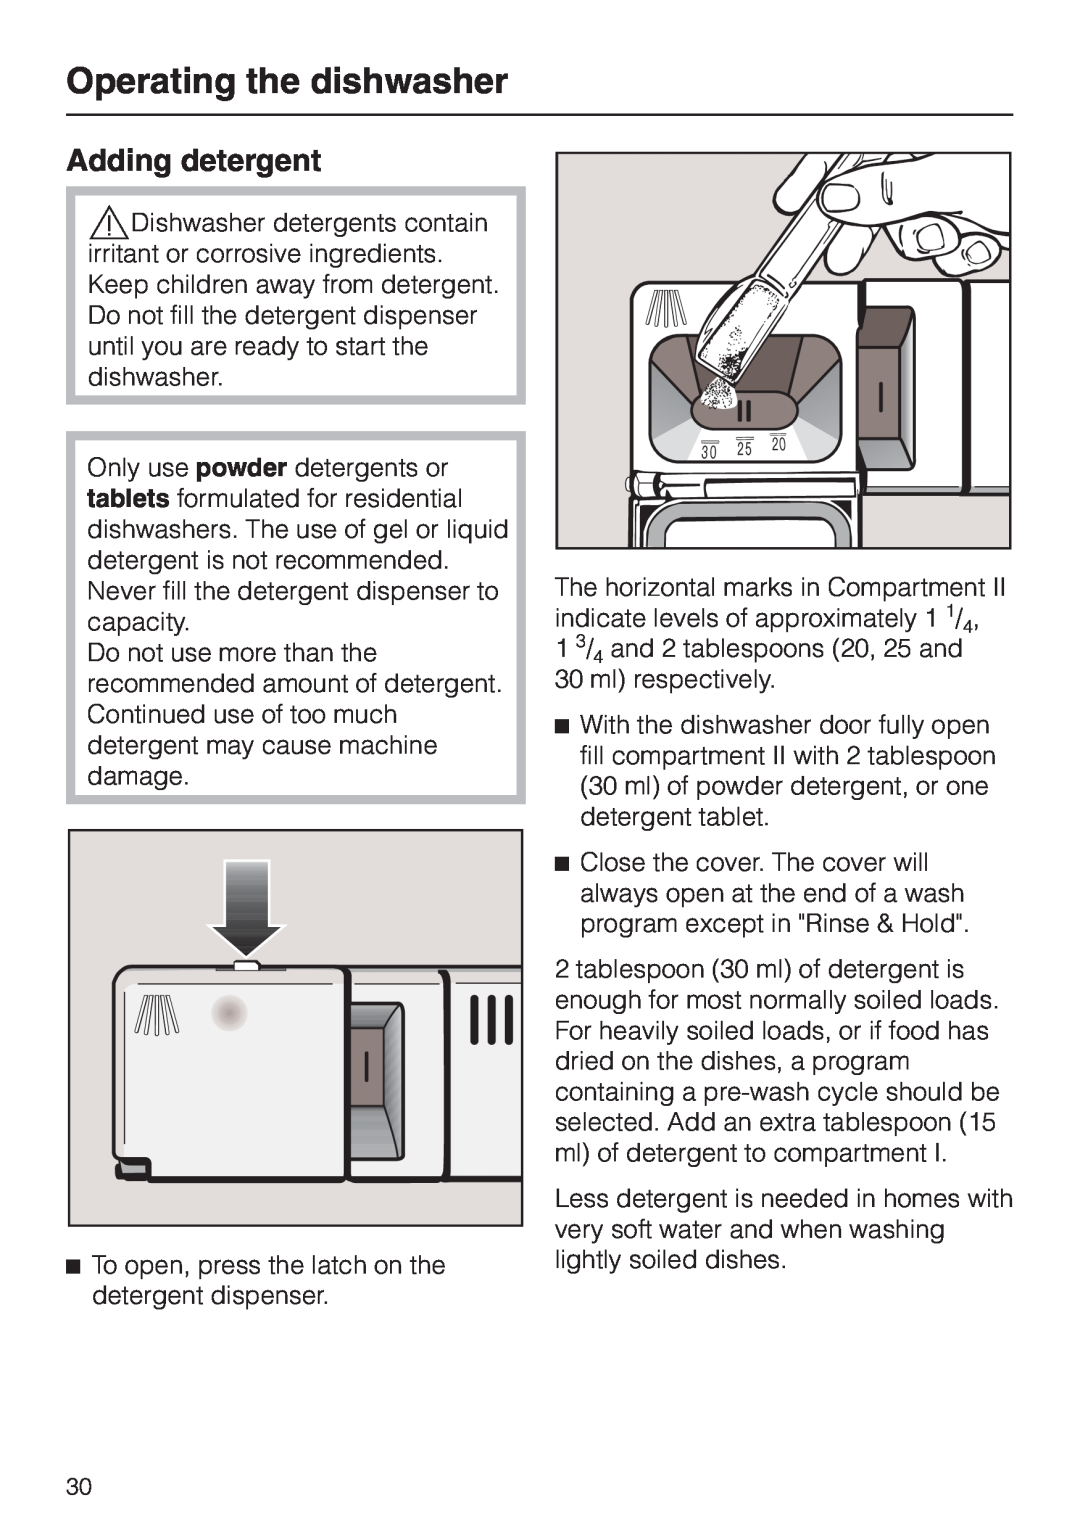 Miele G 663 Plus, G 863 Plus, 05-724-281 operating instructions Operating the dishwasher, Adding detergent 